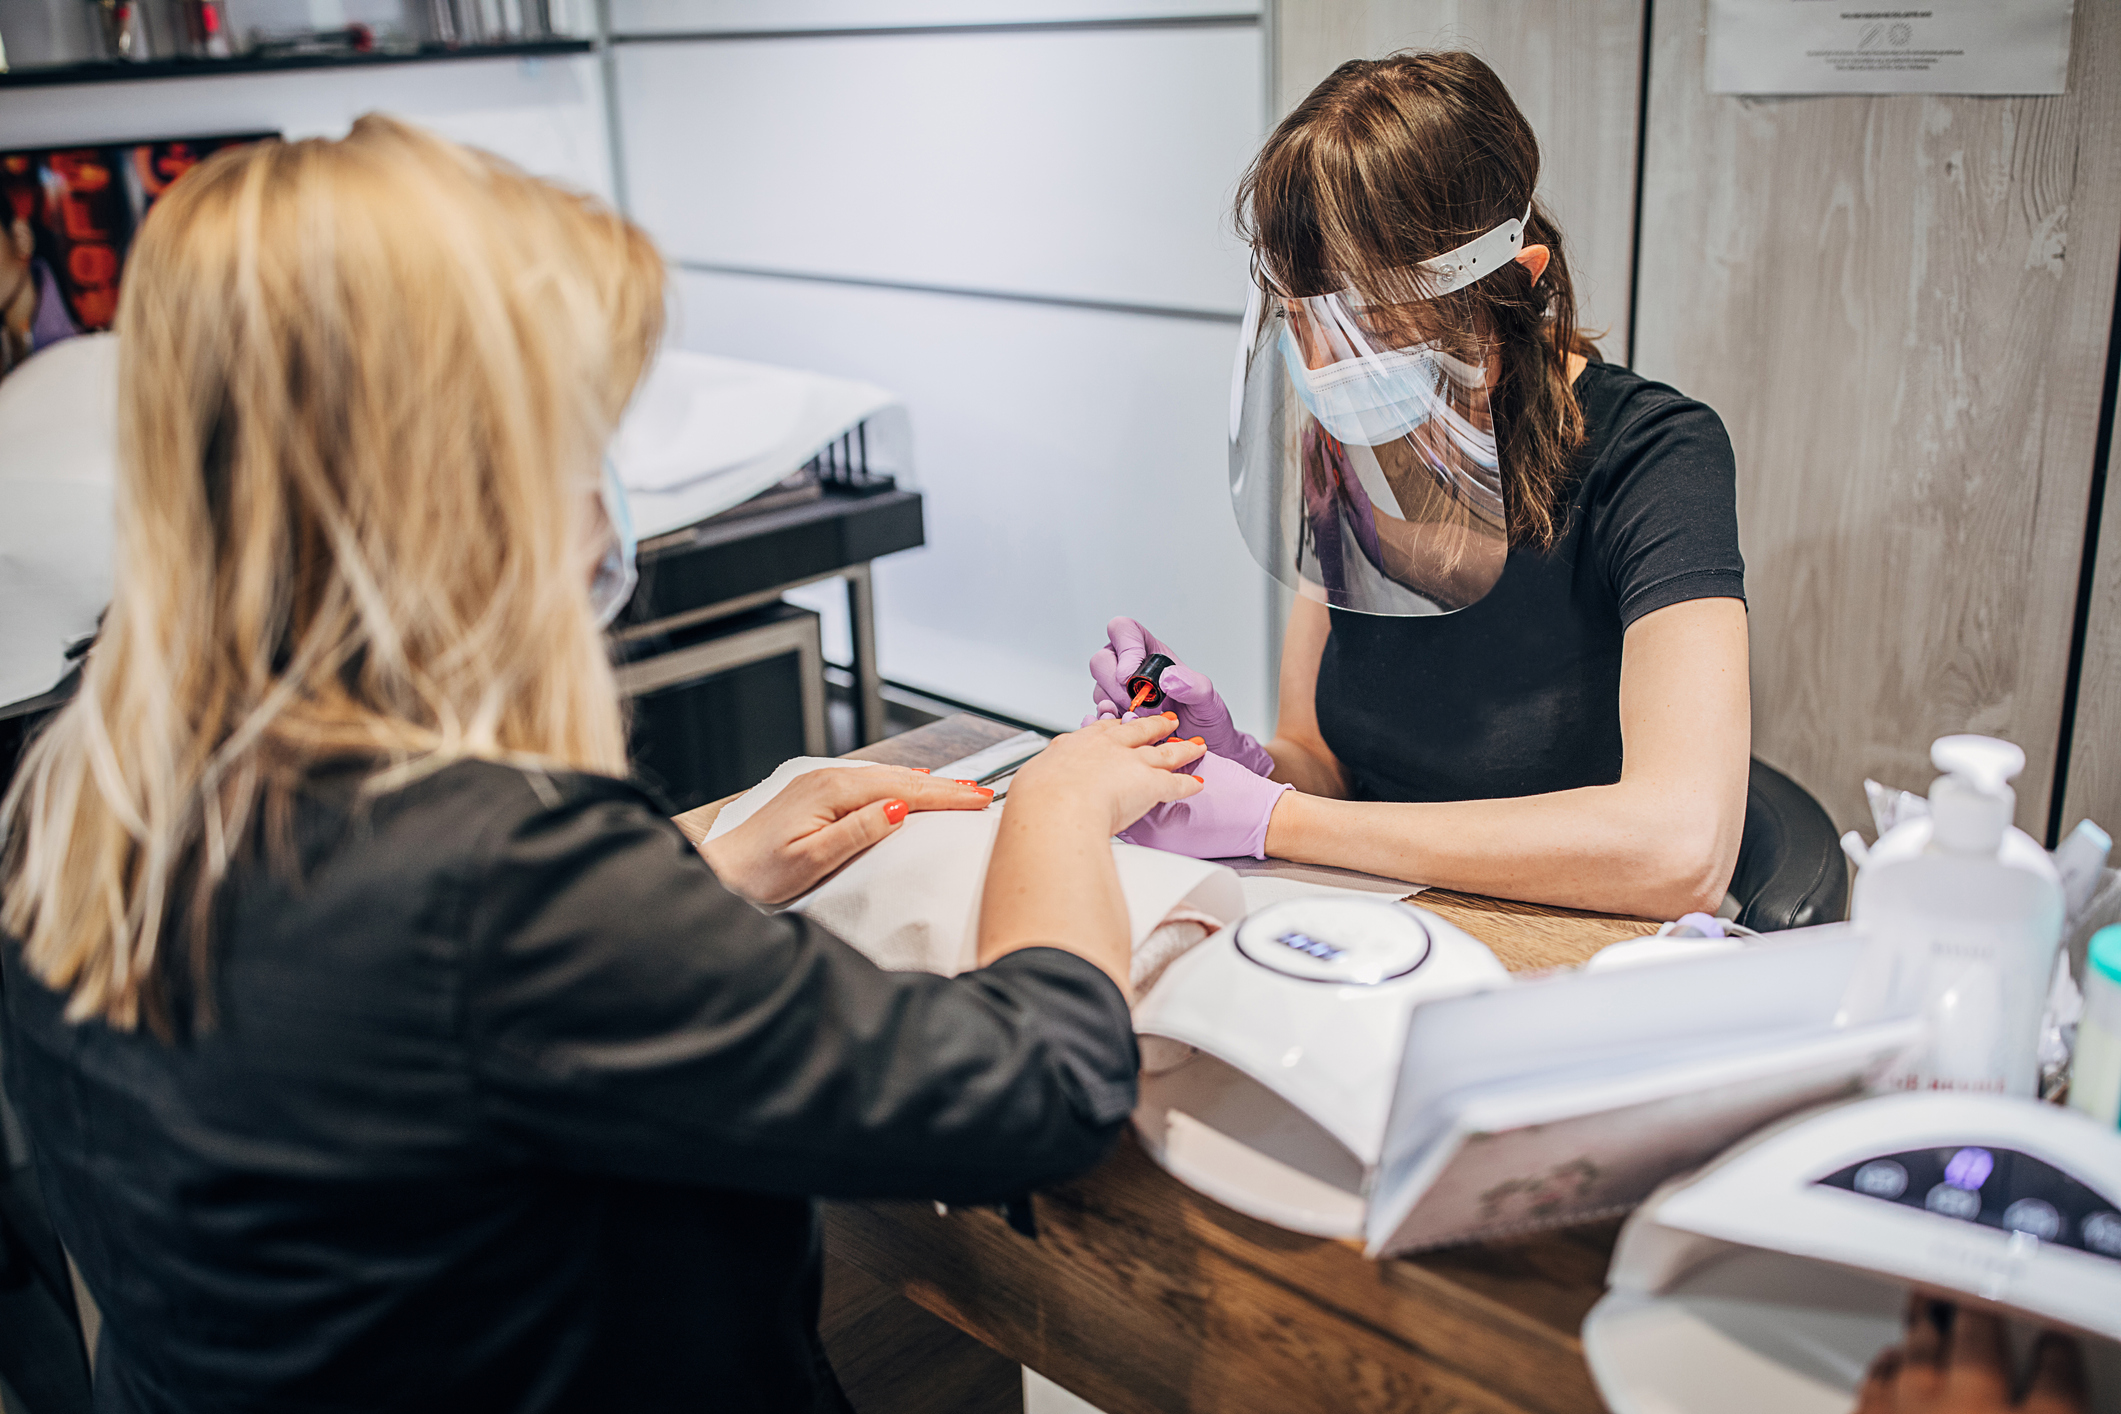 When can nail bars open in the UK?